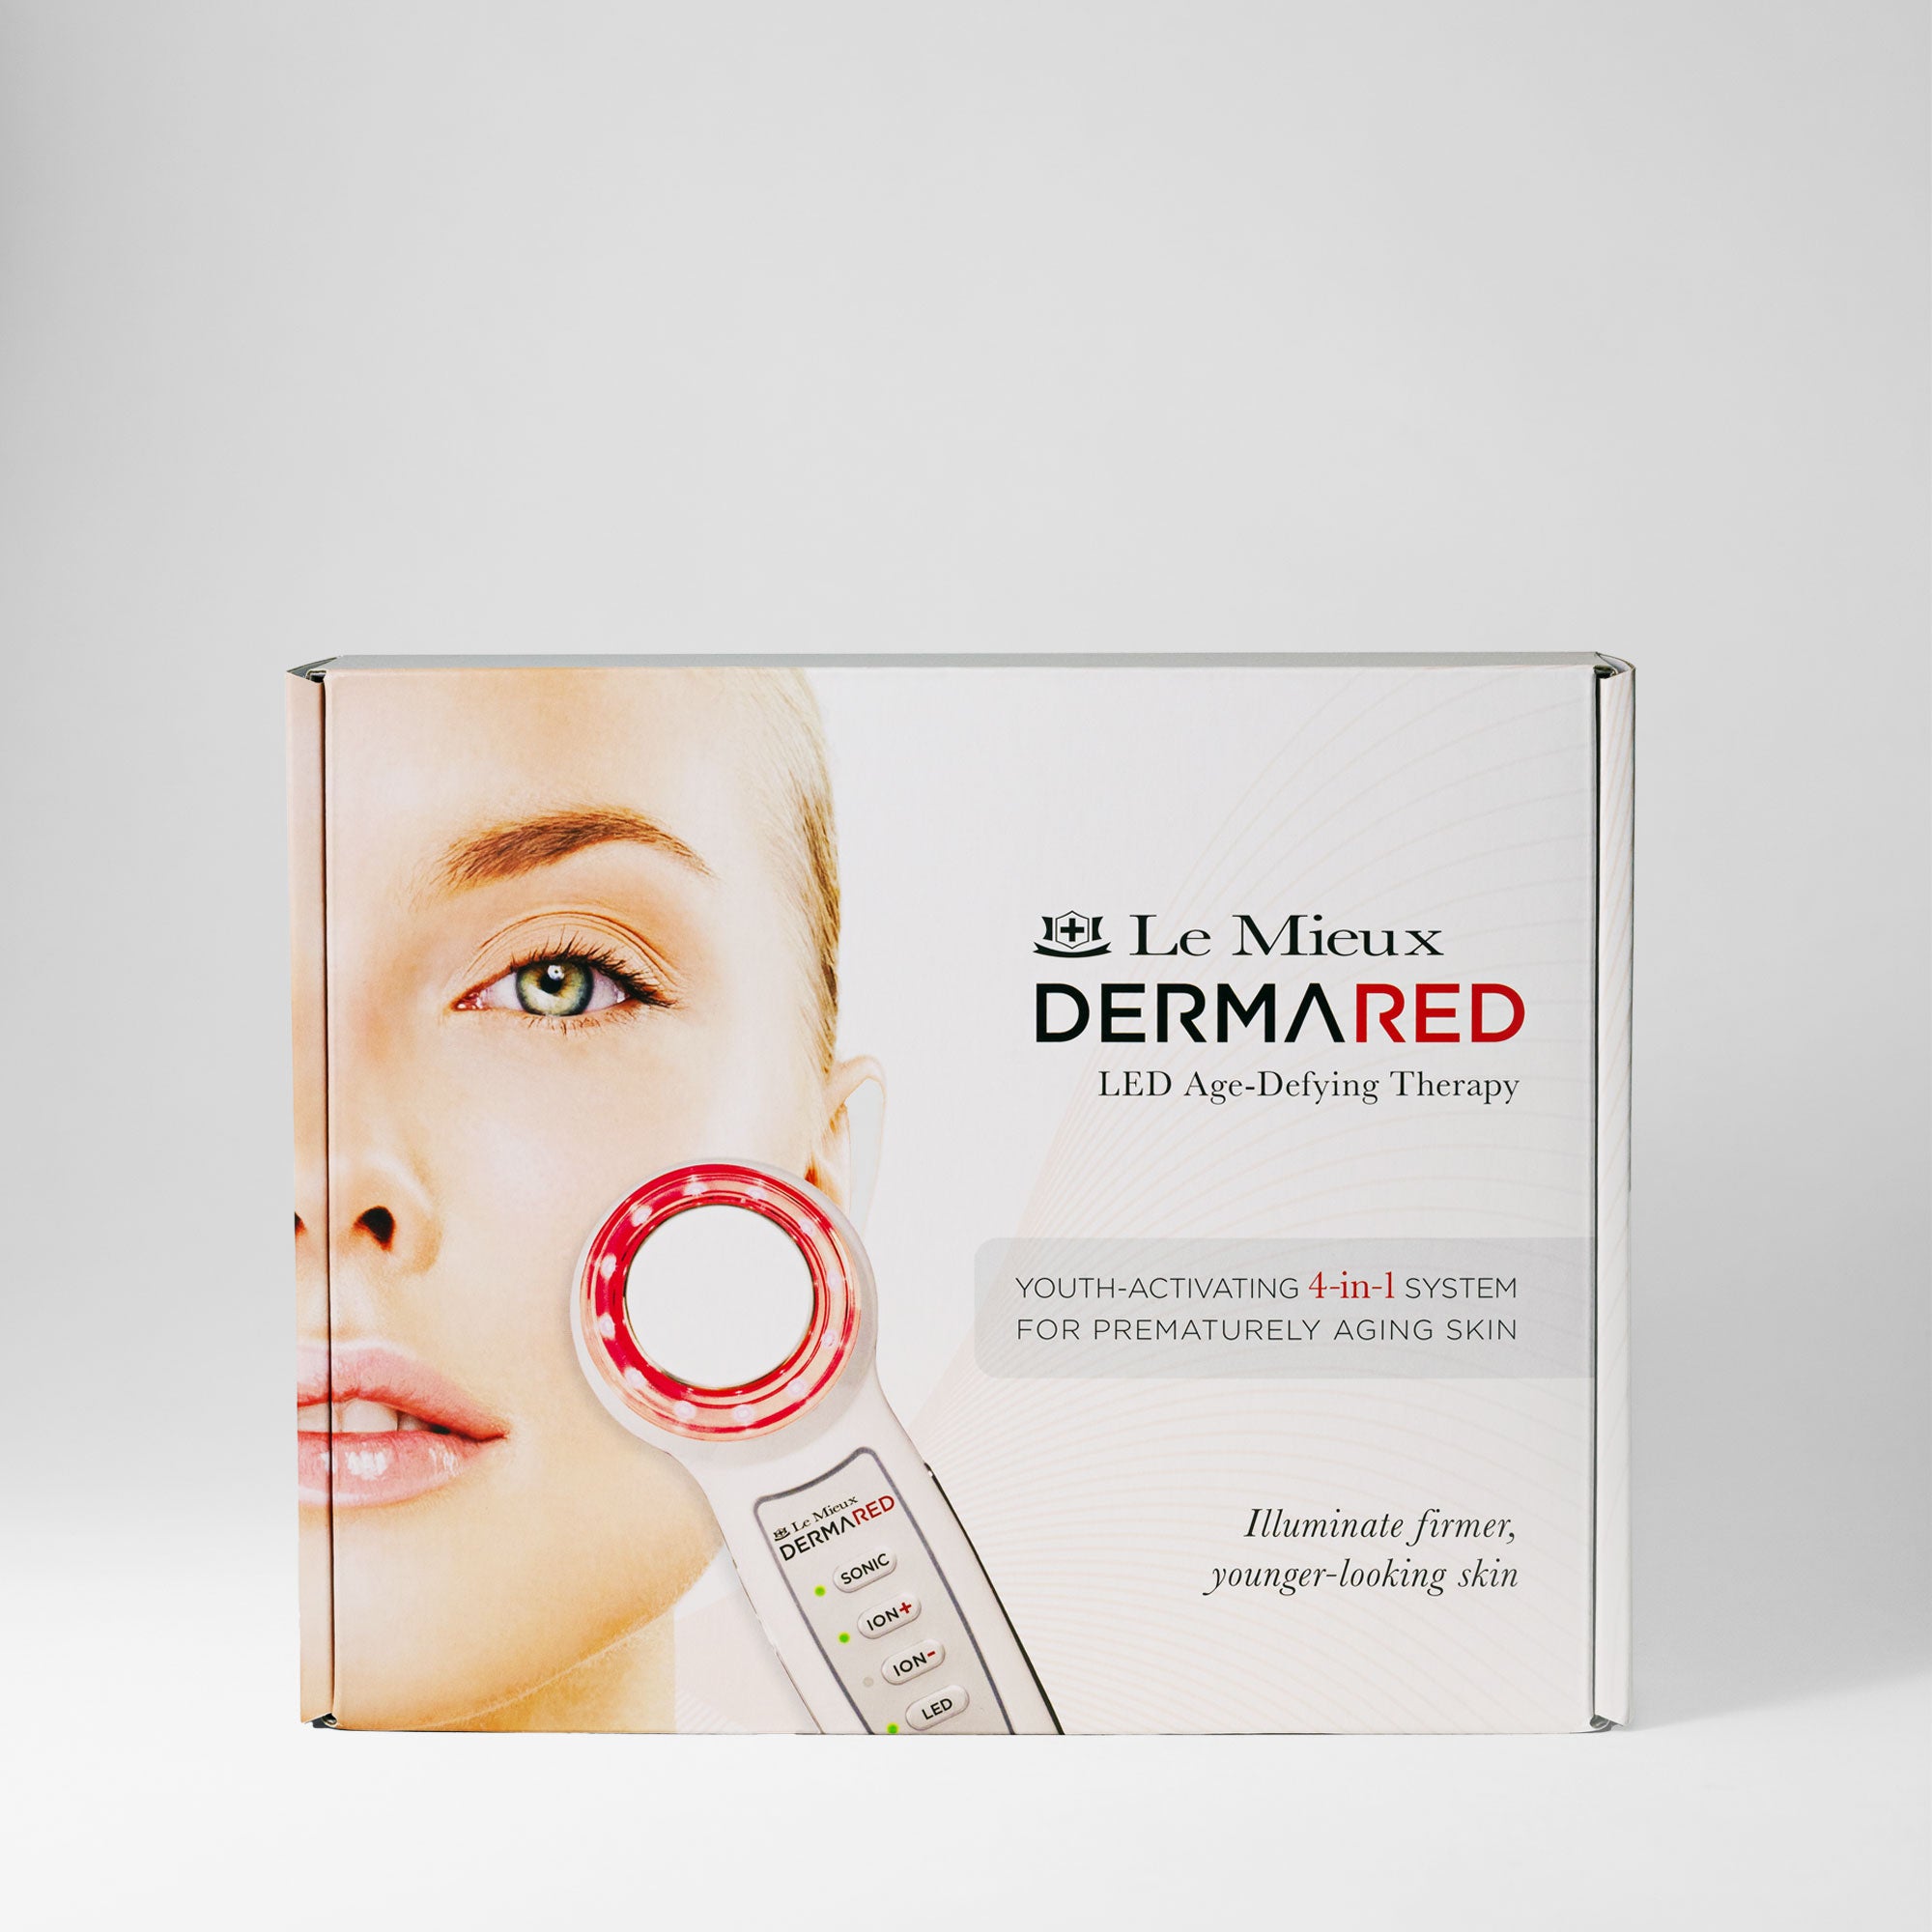  DERMARED from Le Mieux Skincare - 2